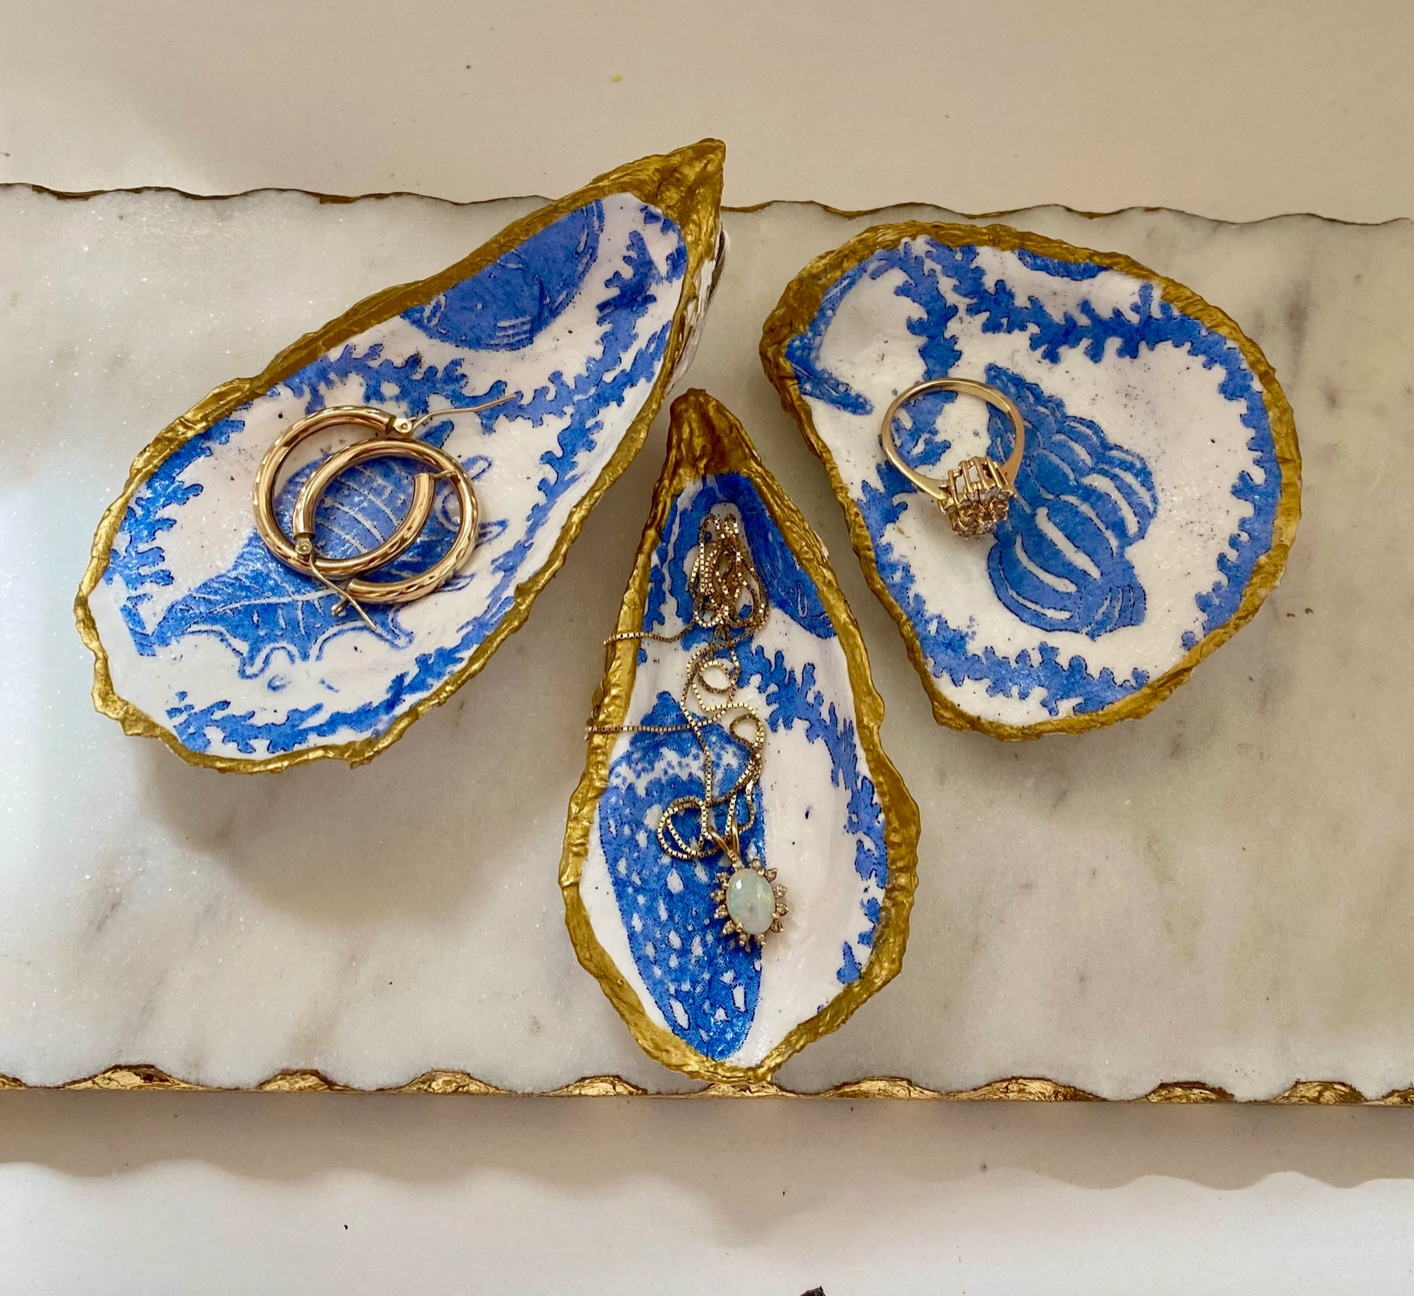 Del Mar Designs DC | Blue Seashell Print  Recycled Oyster Shell Jewelry Dish | Prelude & Dawn Los Angeles